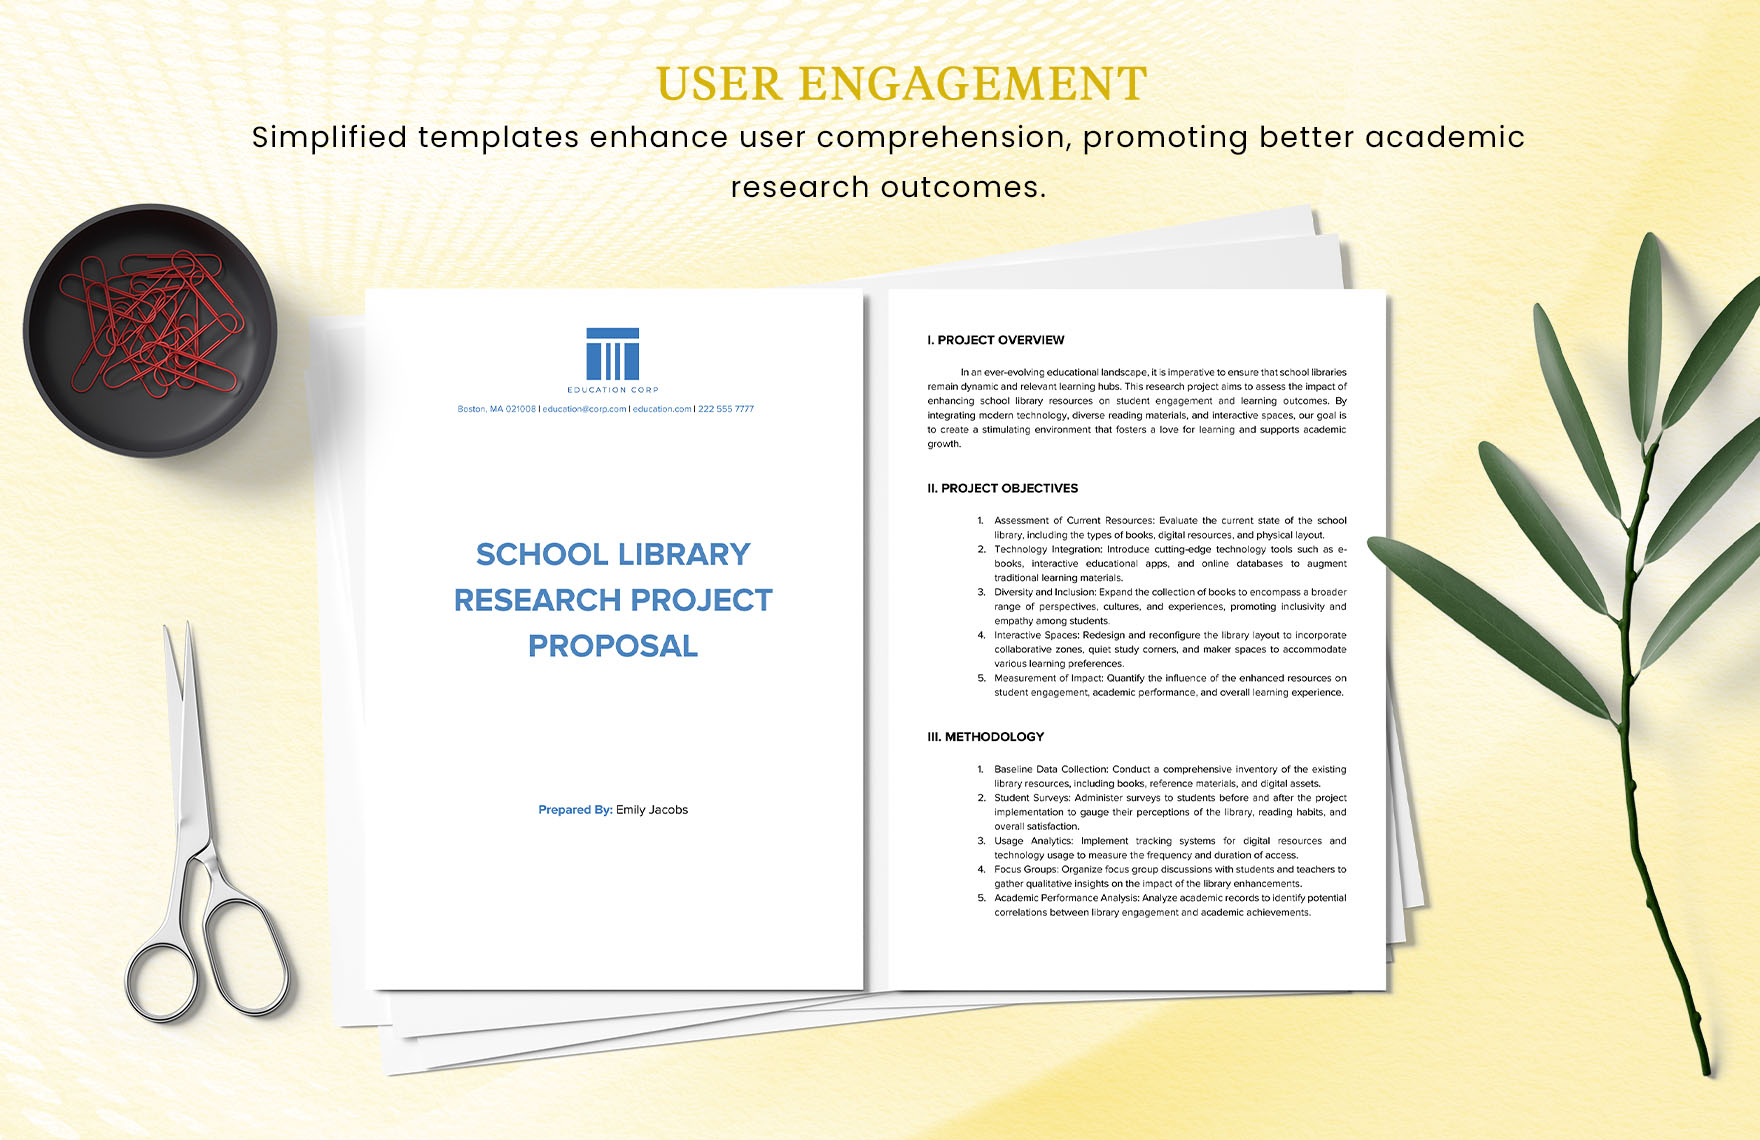 School Library Research Project Proposal Template